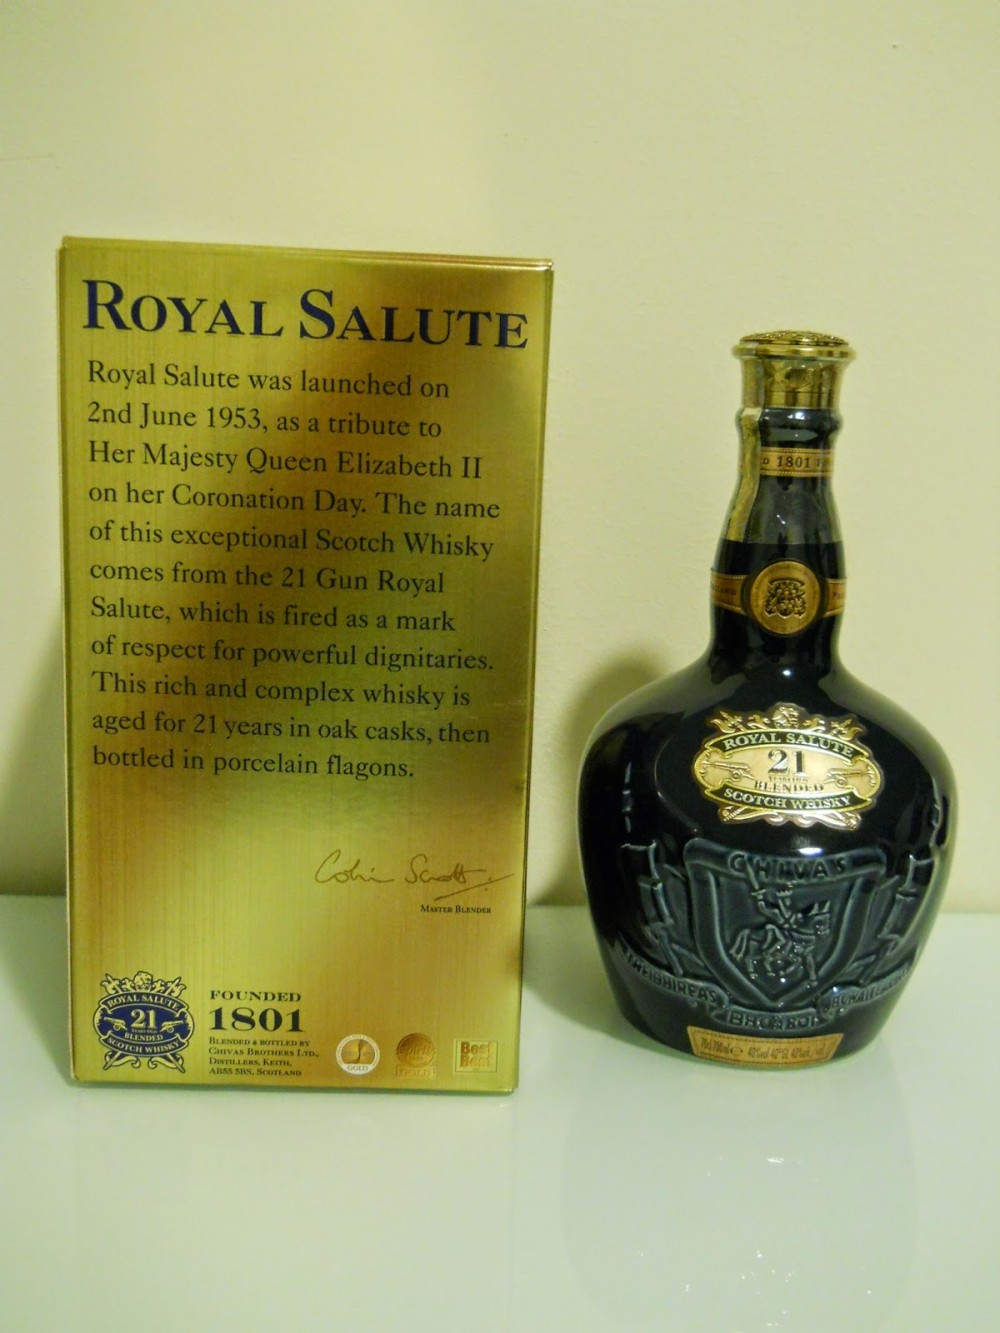 Royal park виски. Виски Chivas, «Royal Salute» 21 years old. Royal Salute 21 Scotch Whisky years old. Chivas Royal Salute 21 years. Чивас Роял салют 21.